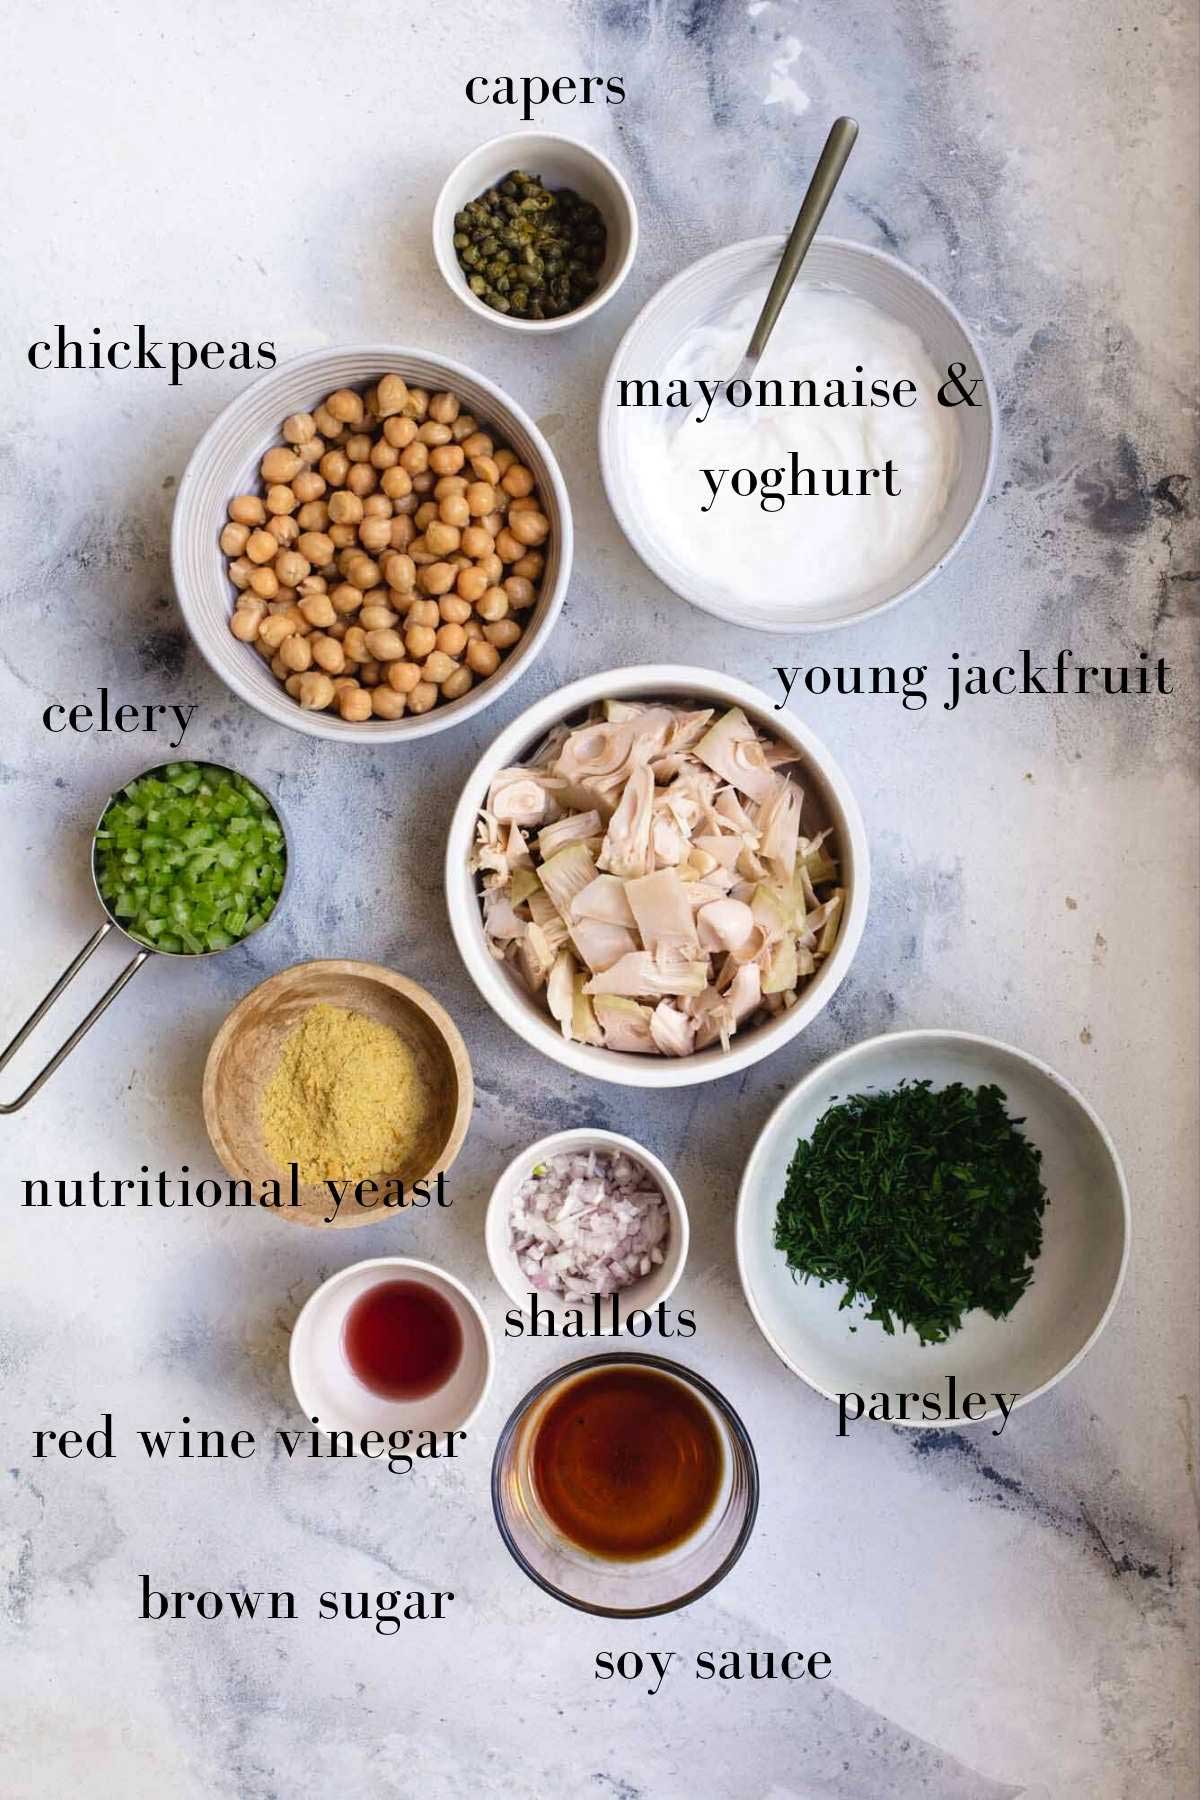 Ingredients for a vegan chicken salad in bowls on a marble background with labels.